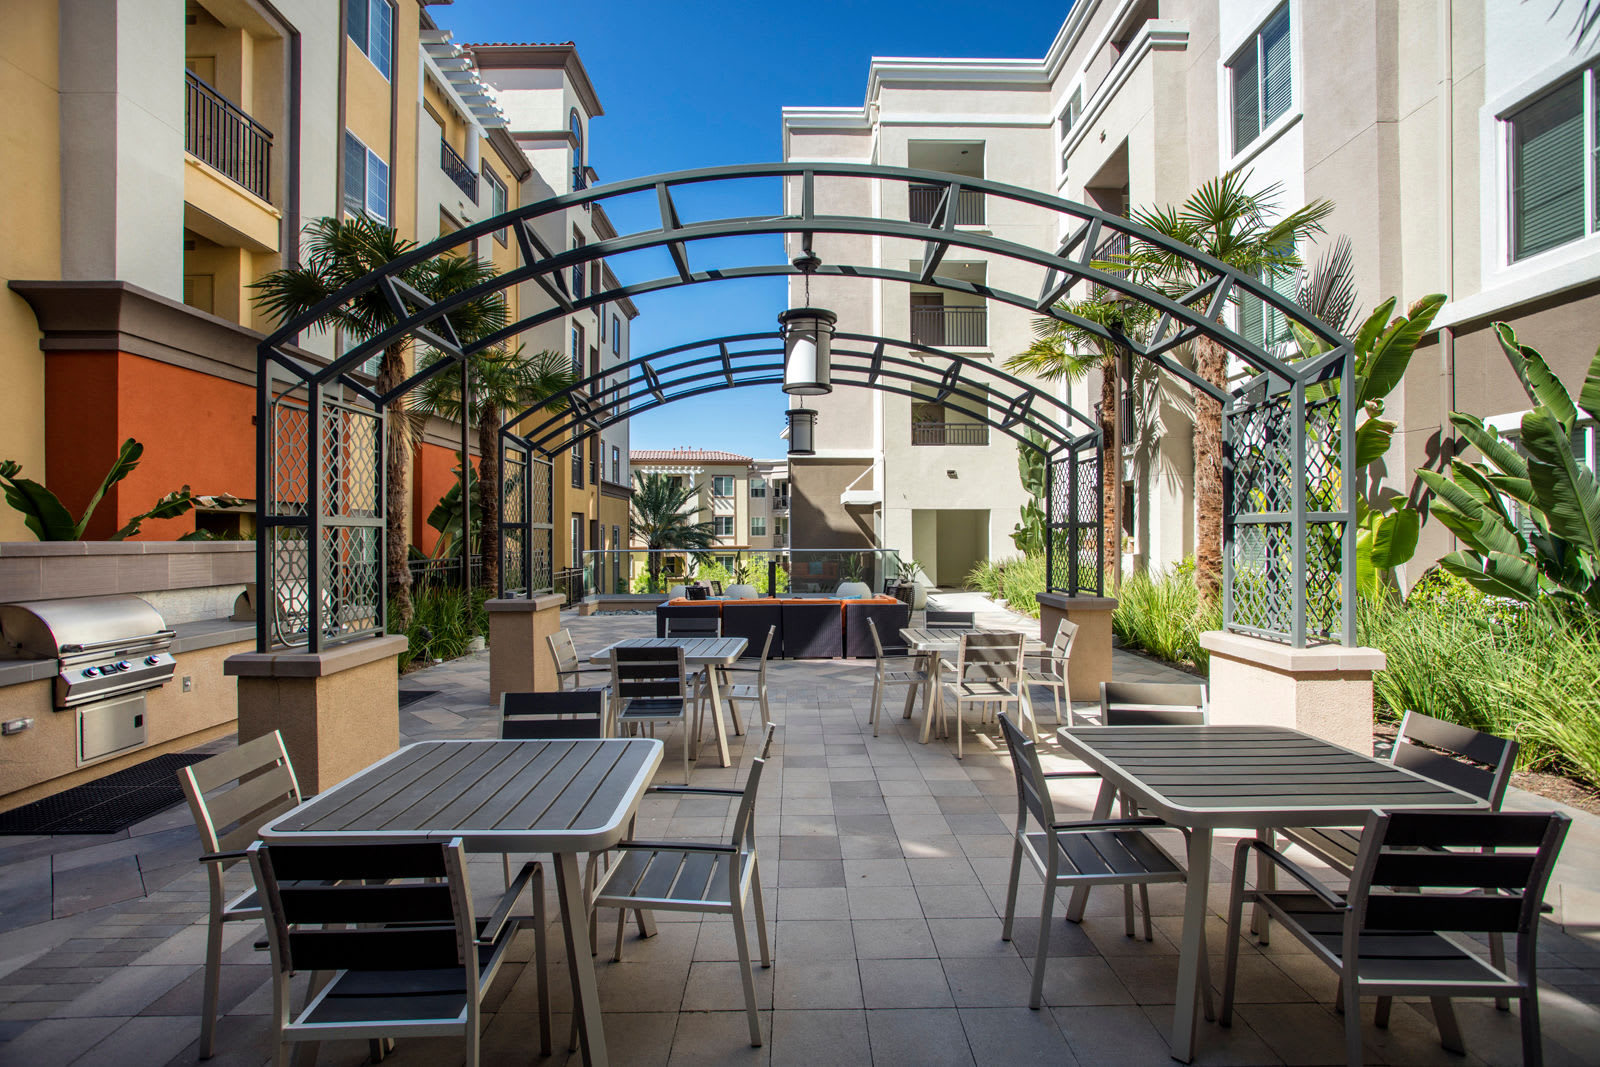 Courtyard with seating at The Boulevard Apartment Homes in Woodland Hills, California